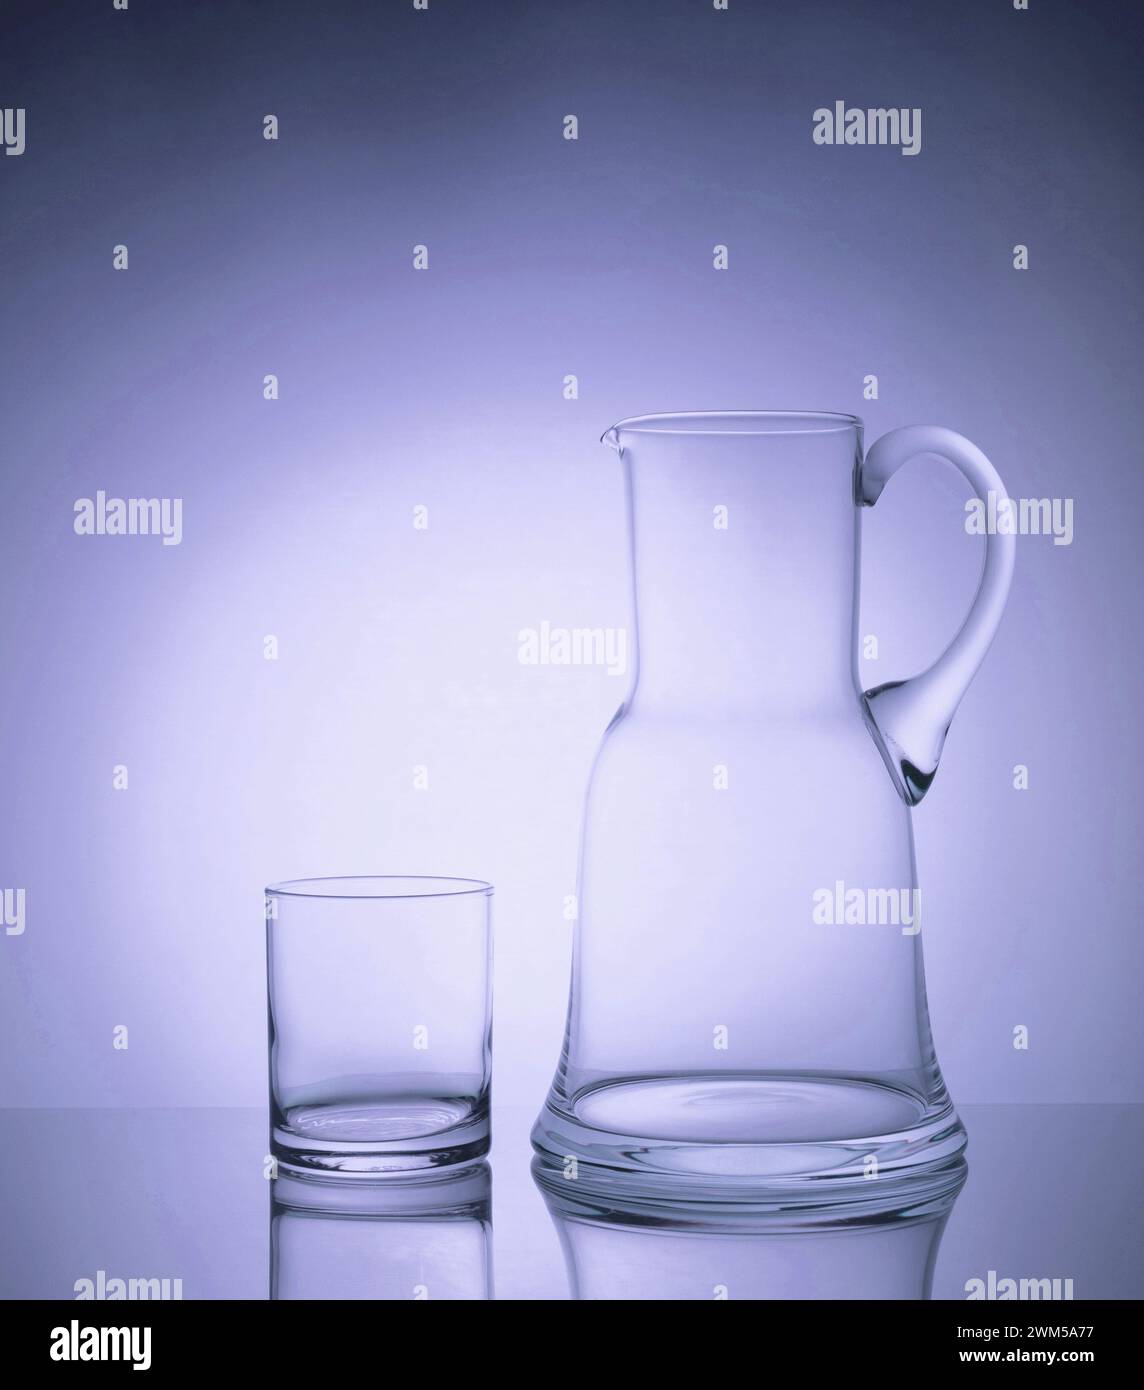 A stunning display of elegant glassware, illuminated by the glowing backlight and enhanced with helium filters, creating a mesmerizing and luxurious a Stock Photo